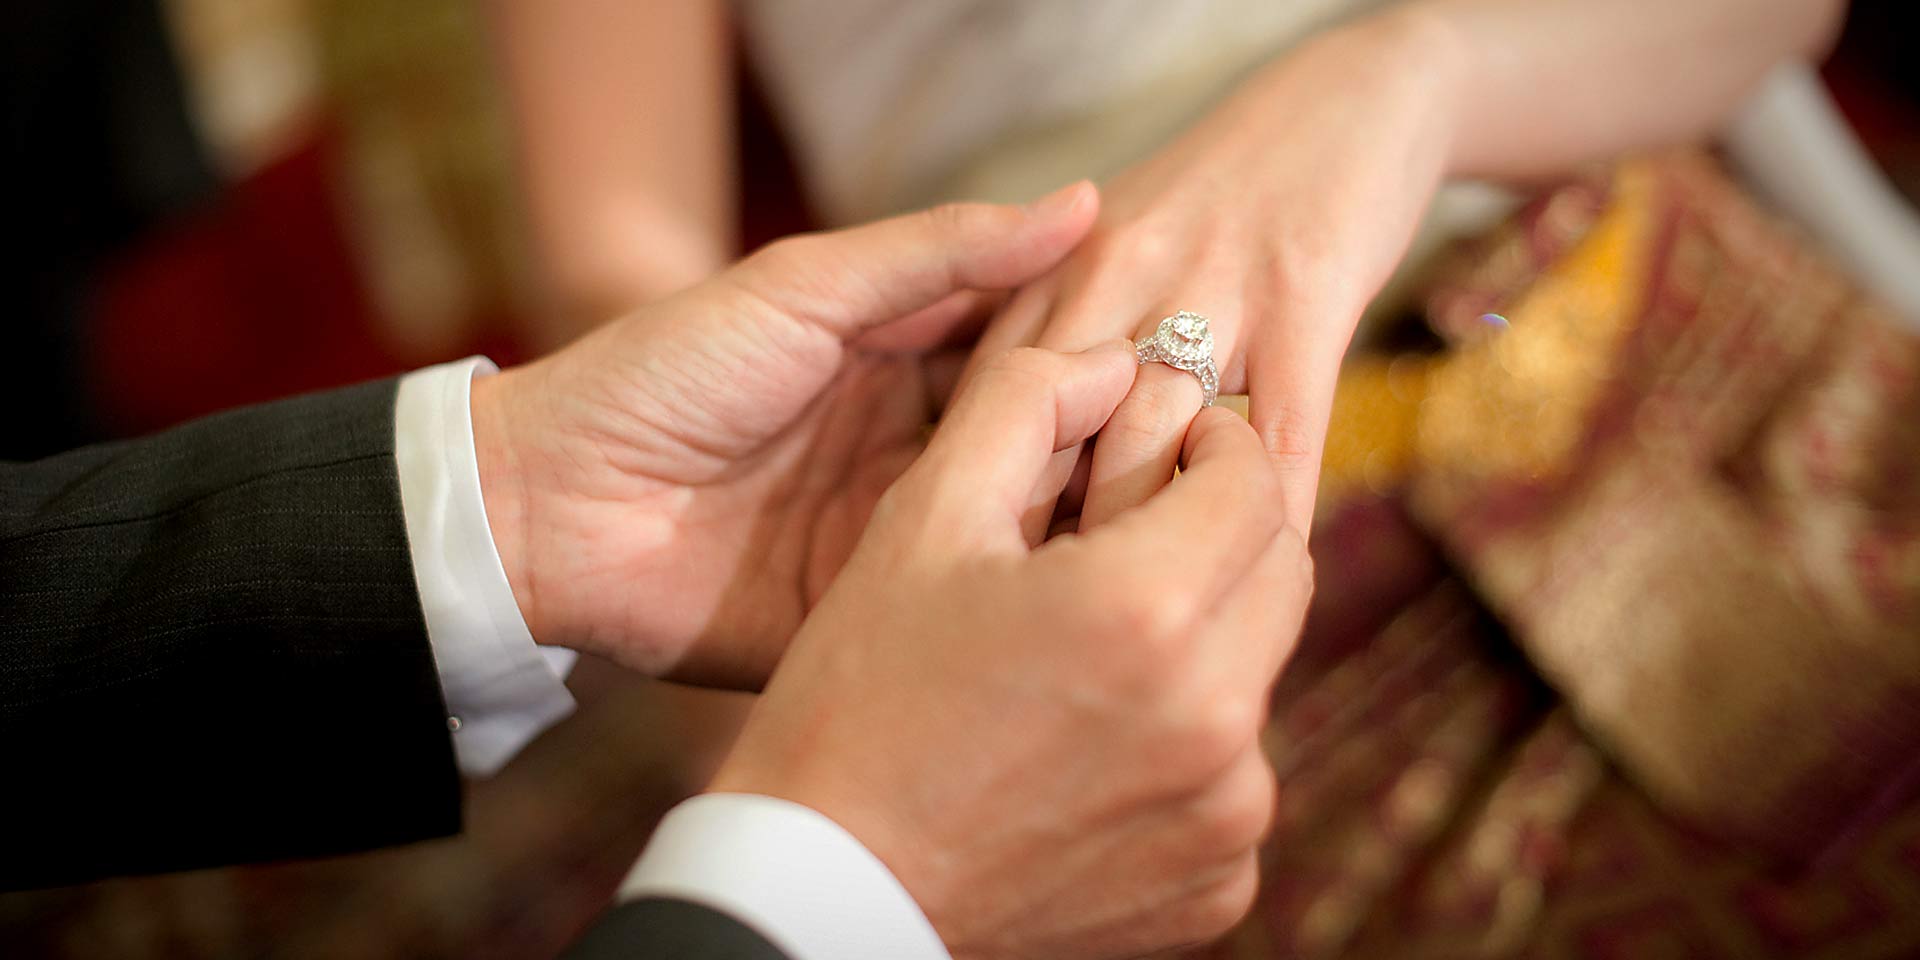 Have a successful marriage proposal with our tips!